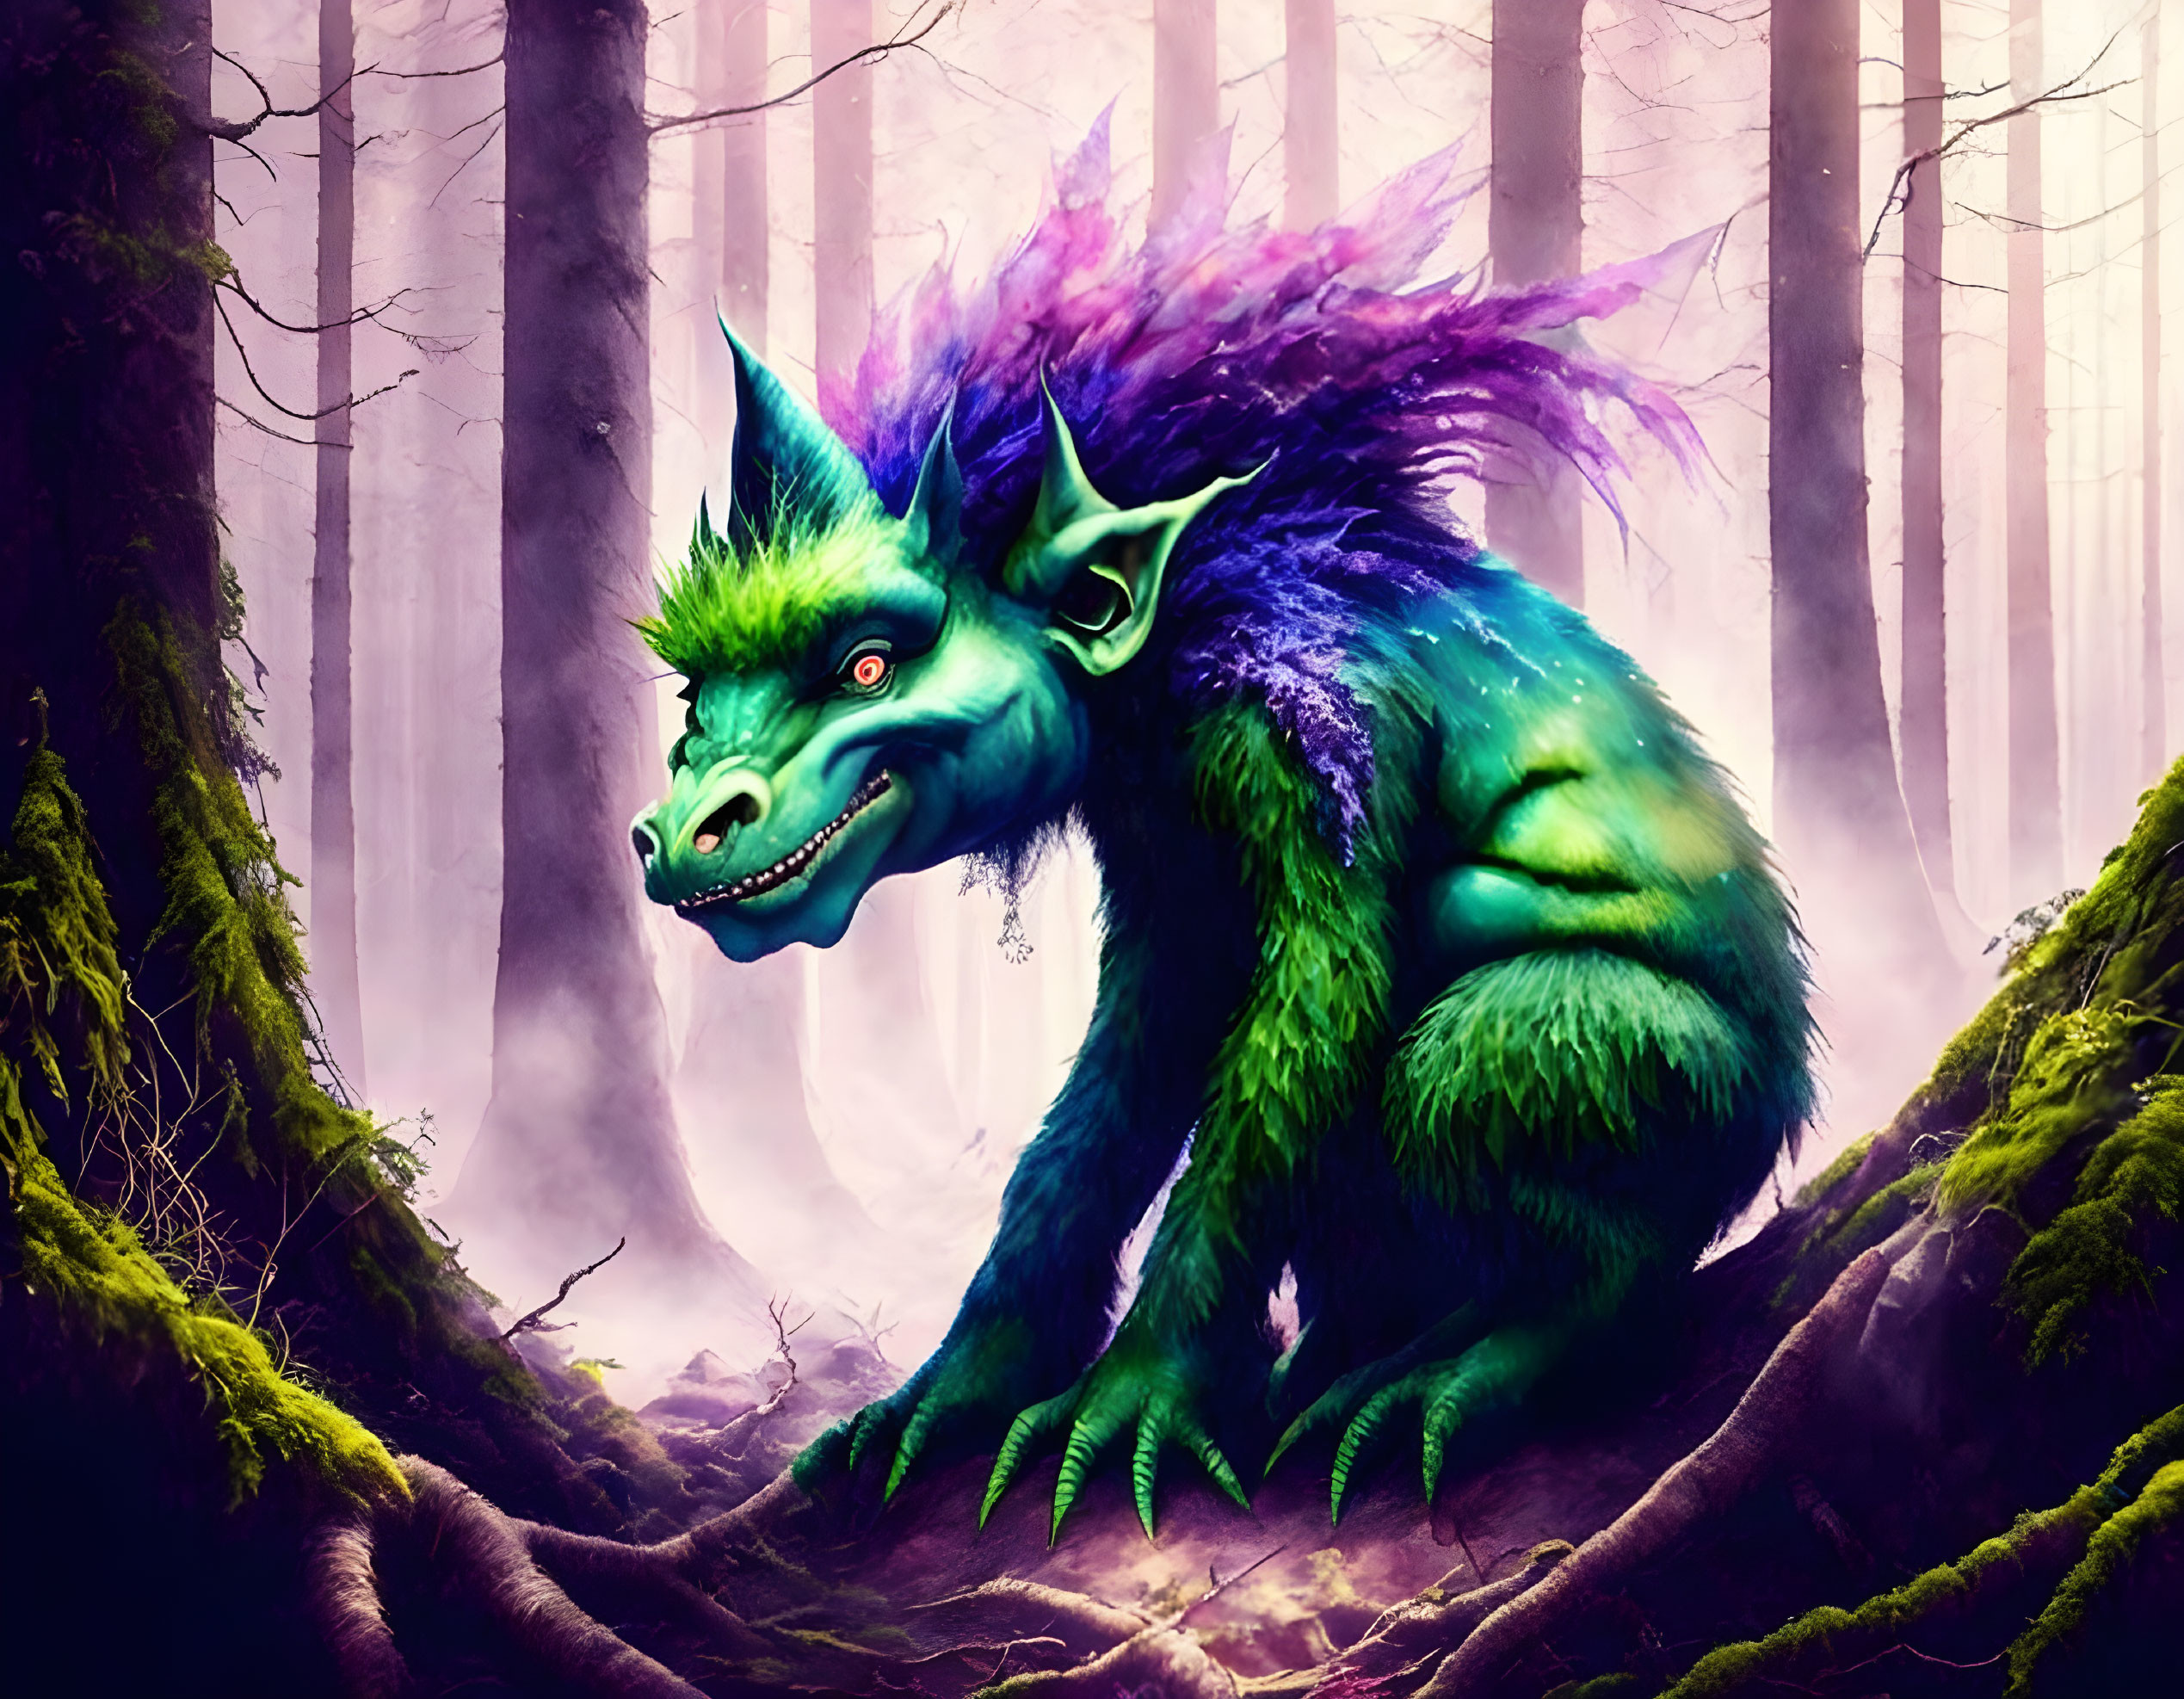 Mythical creature with green skin, large horns, and purple fur in misty forest